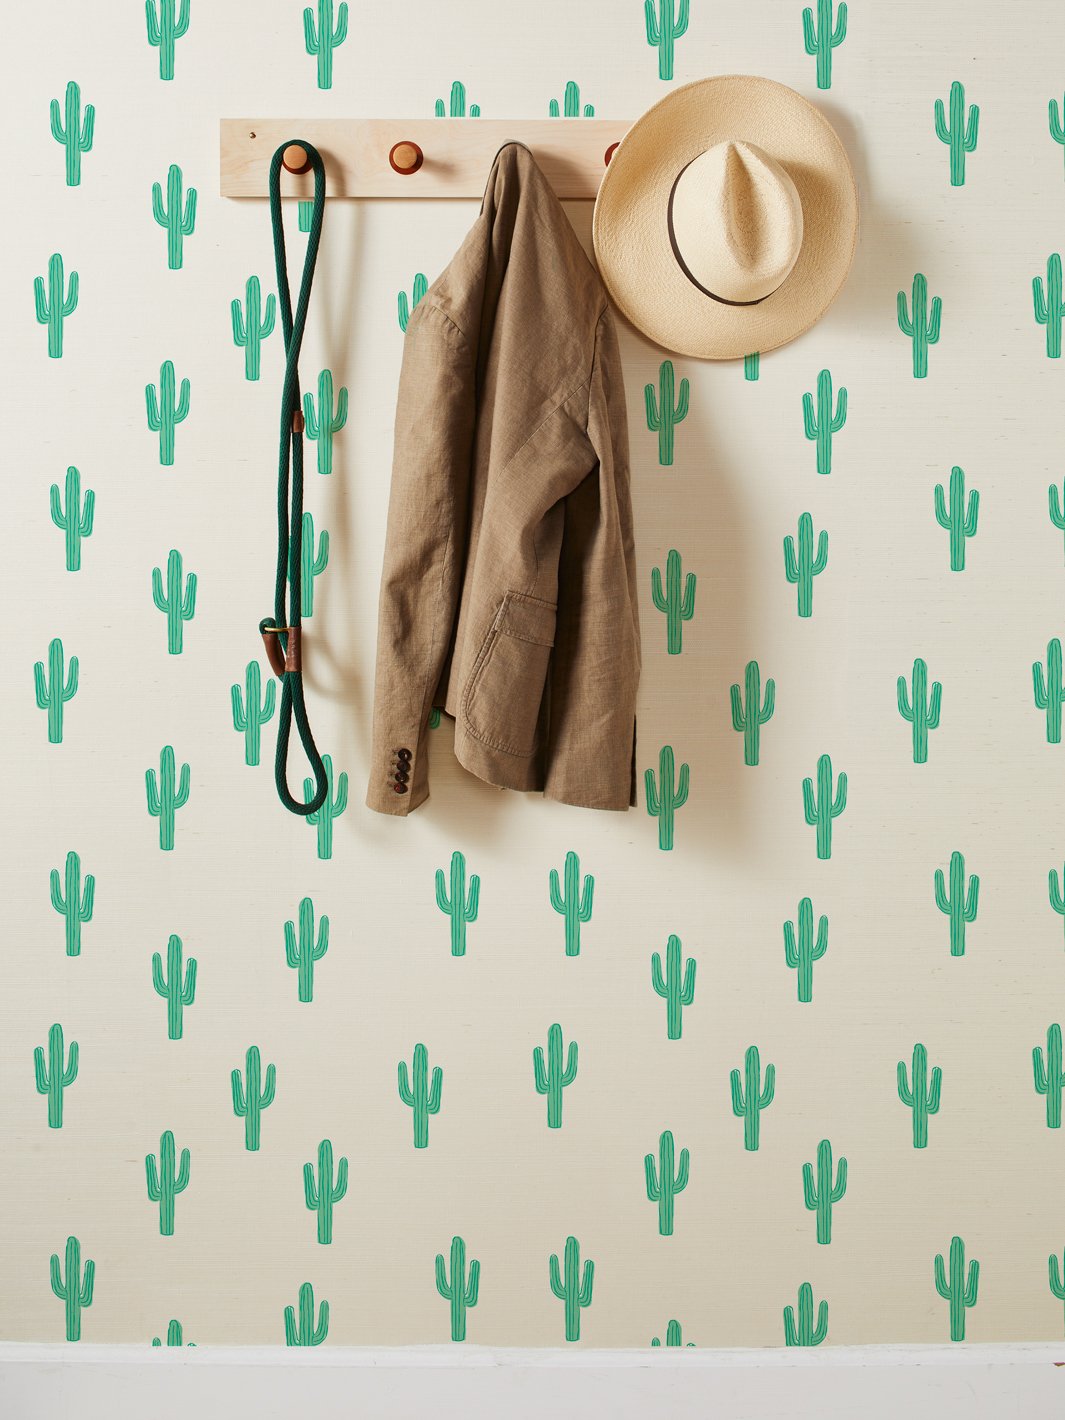 'Cactus' Grasscloth' Wallpaper by Tea Collection